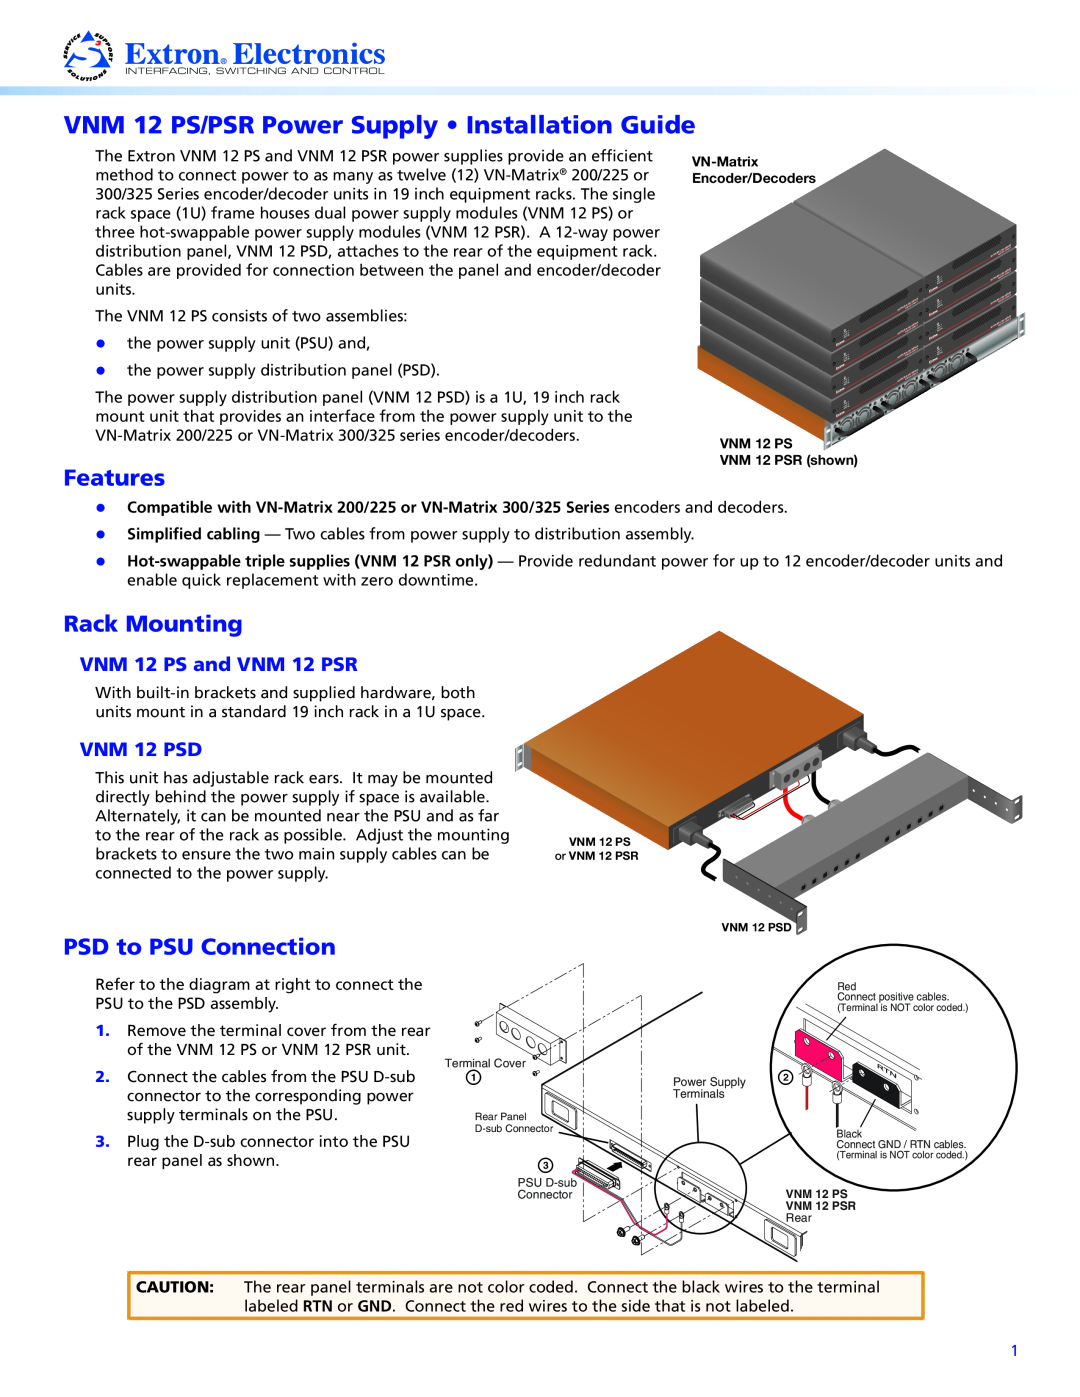 Extron electronic manual VNM 12 PS/PSR Power Supply Installation Guide, Features, Rack Mounting, PSD to PSU Connection 